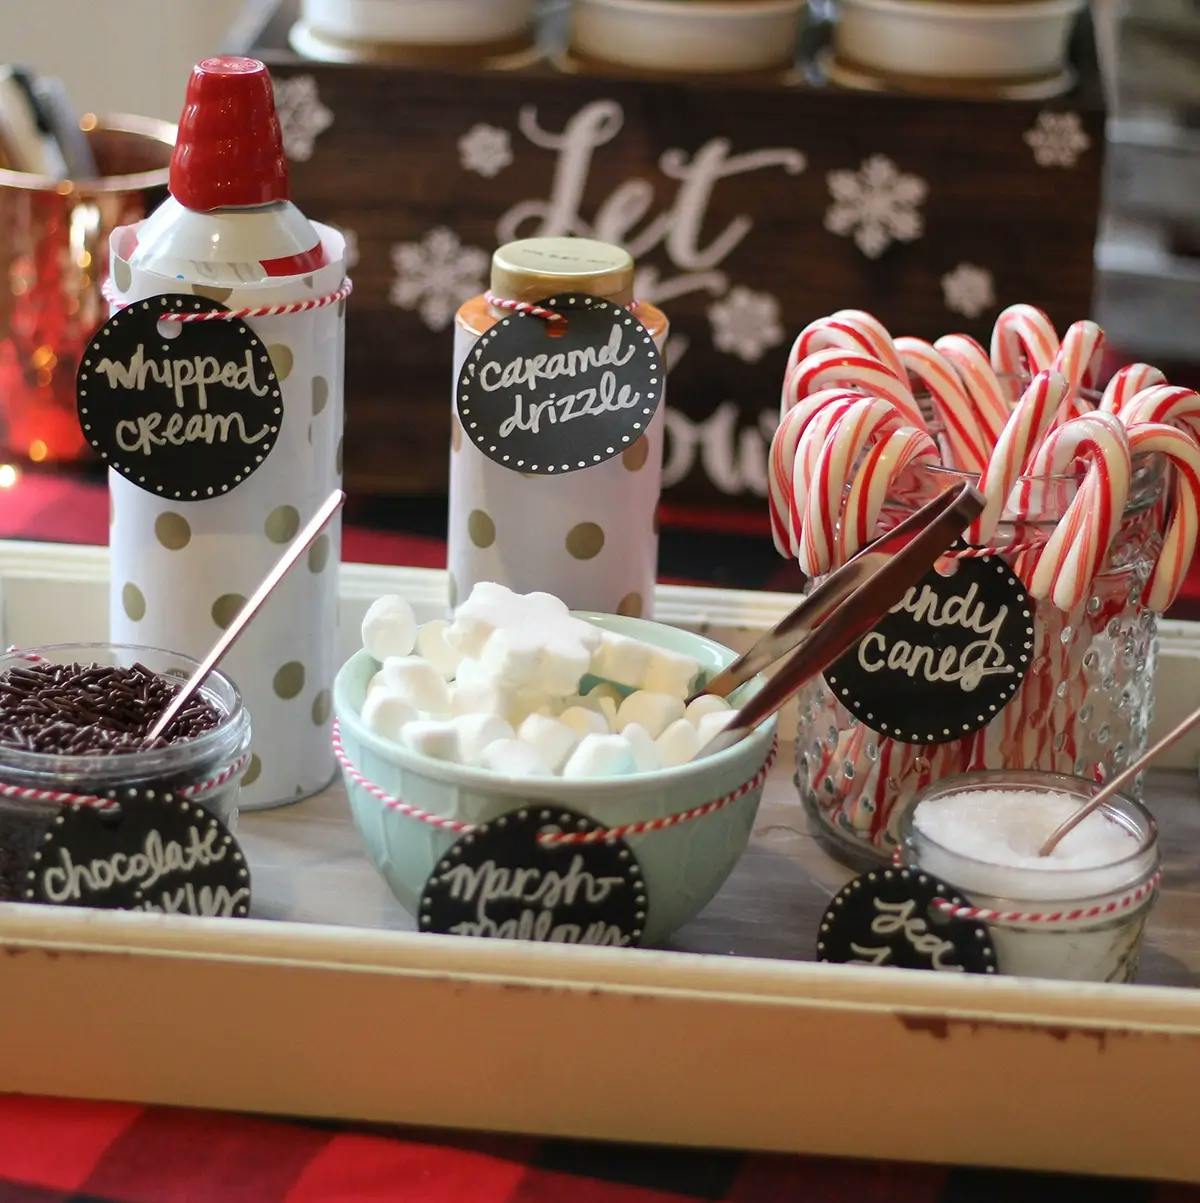 Hot chocolate topping station, showing whipped cream, caramel drizzle, candy canes, chocolate sprinkles, marshmallows, and sea salt.